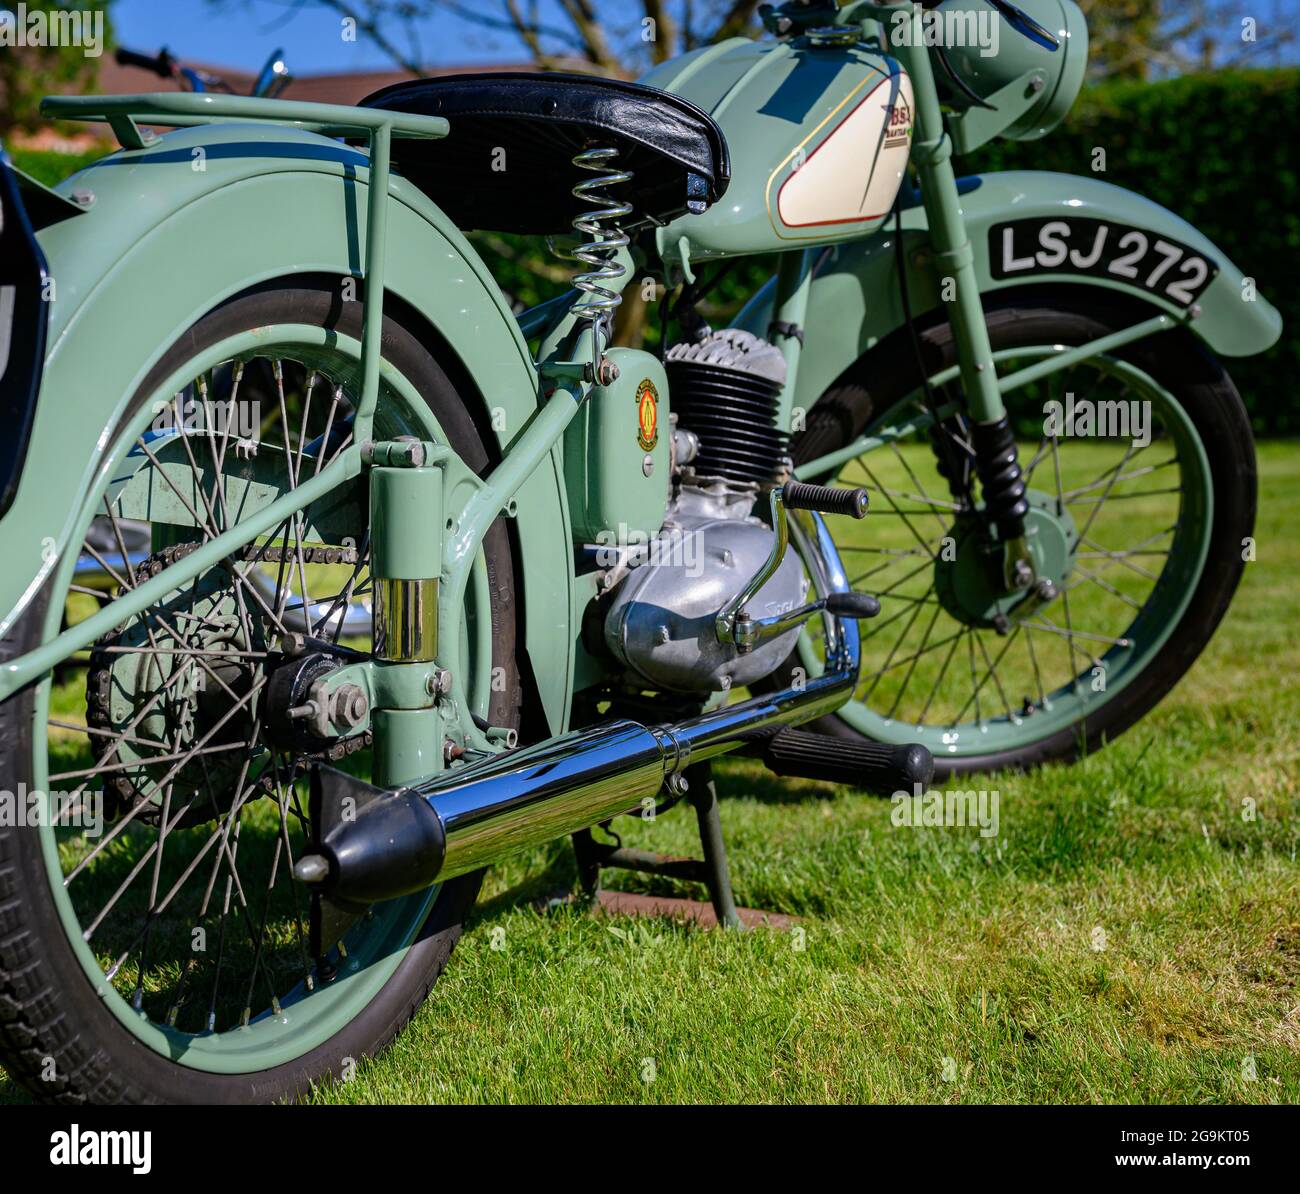 The 1955 D1 125cc BSA Bantam Motorcycle in original Mist Green colour, a popular vintage motorcycle that has been fully restored Stock Photo